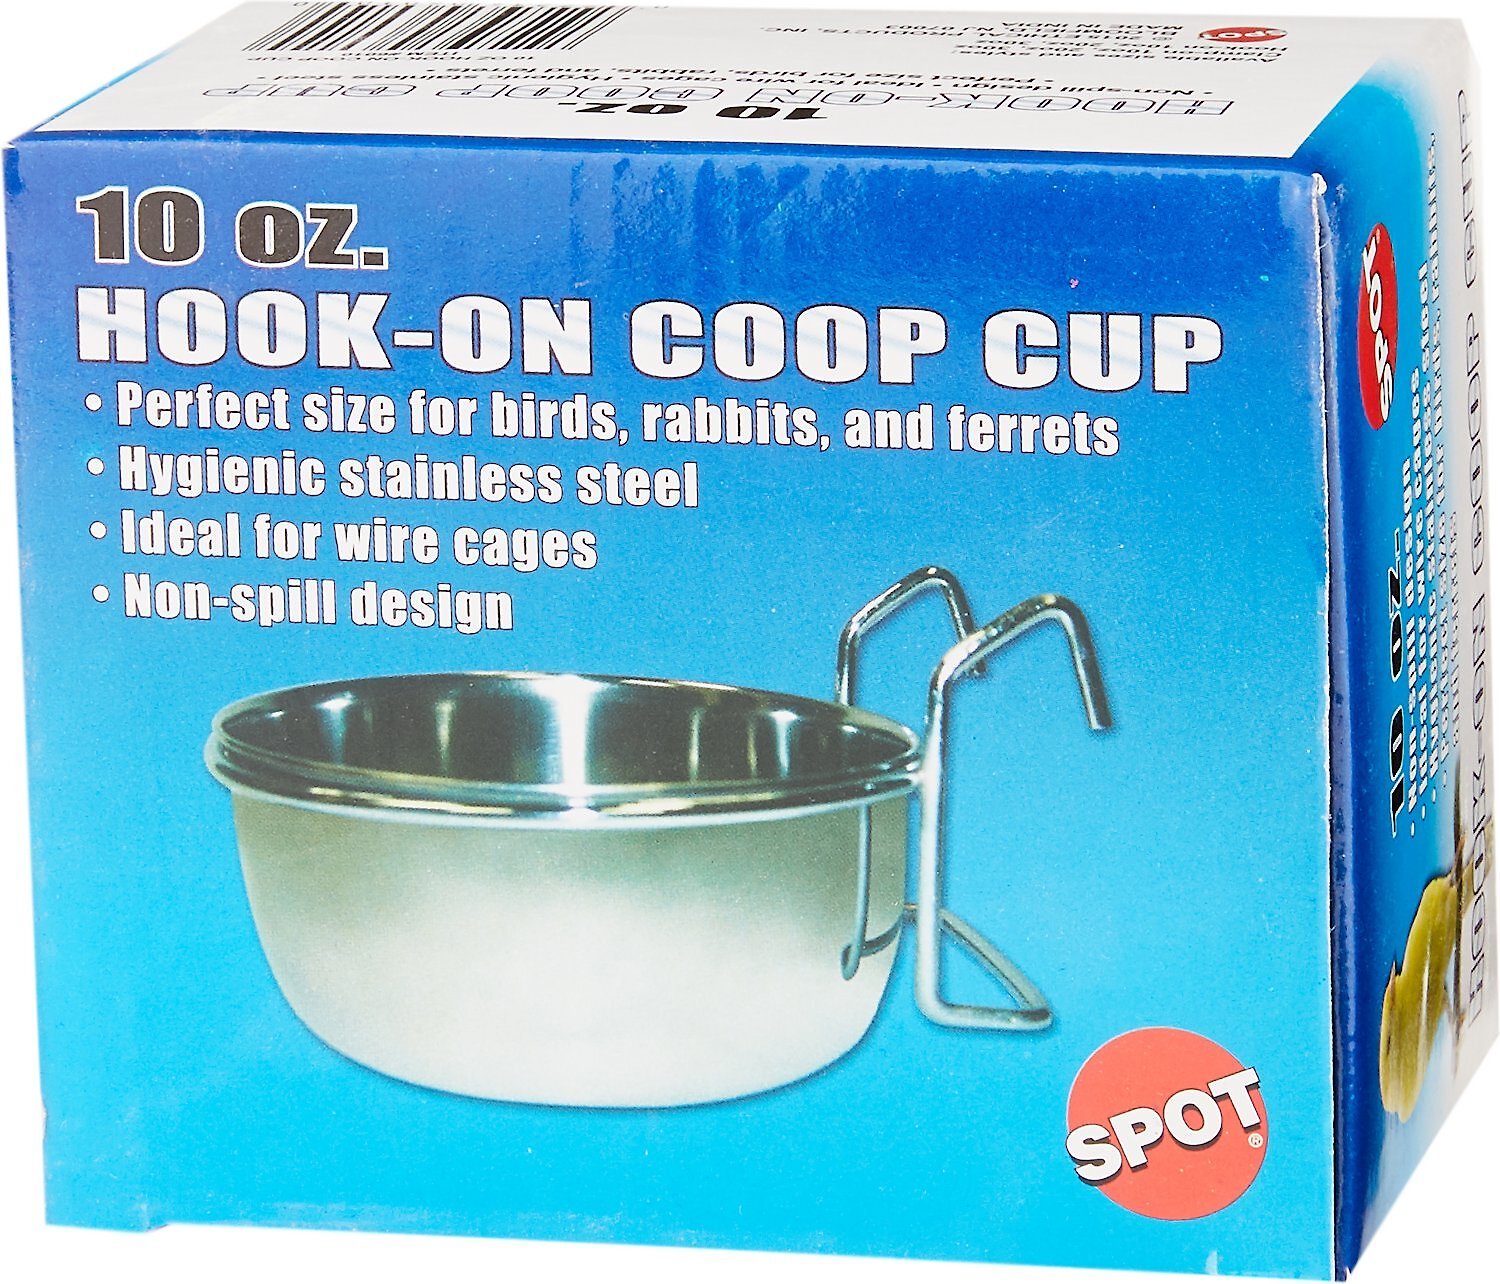 2 of Versatile Stainless Steel Coop Cups For Pet and Animal Cages 4" 